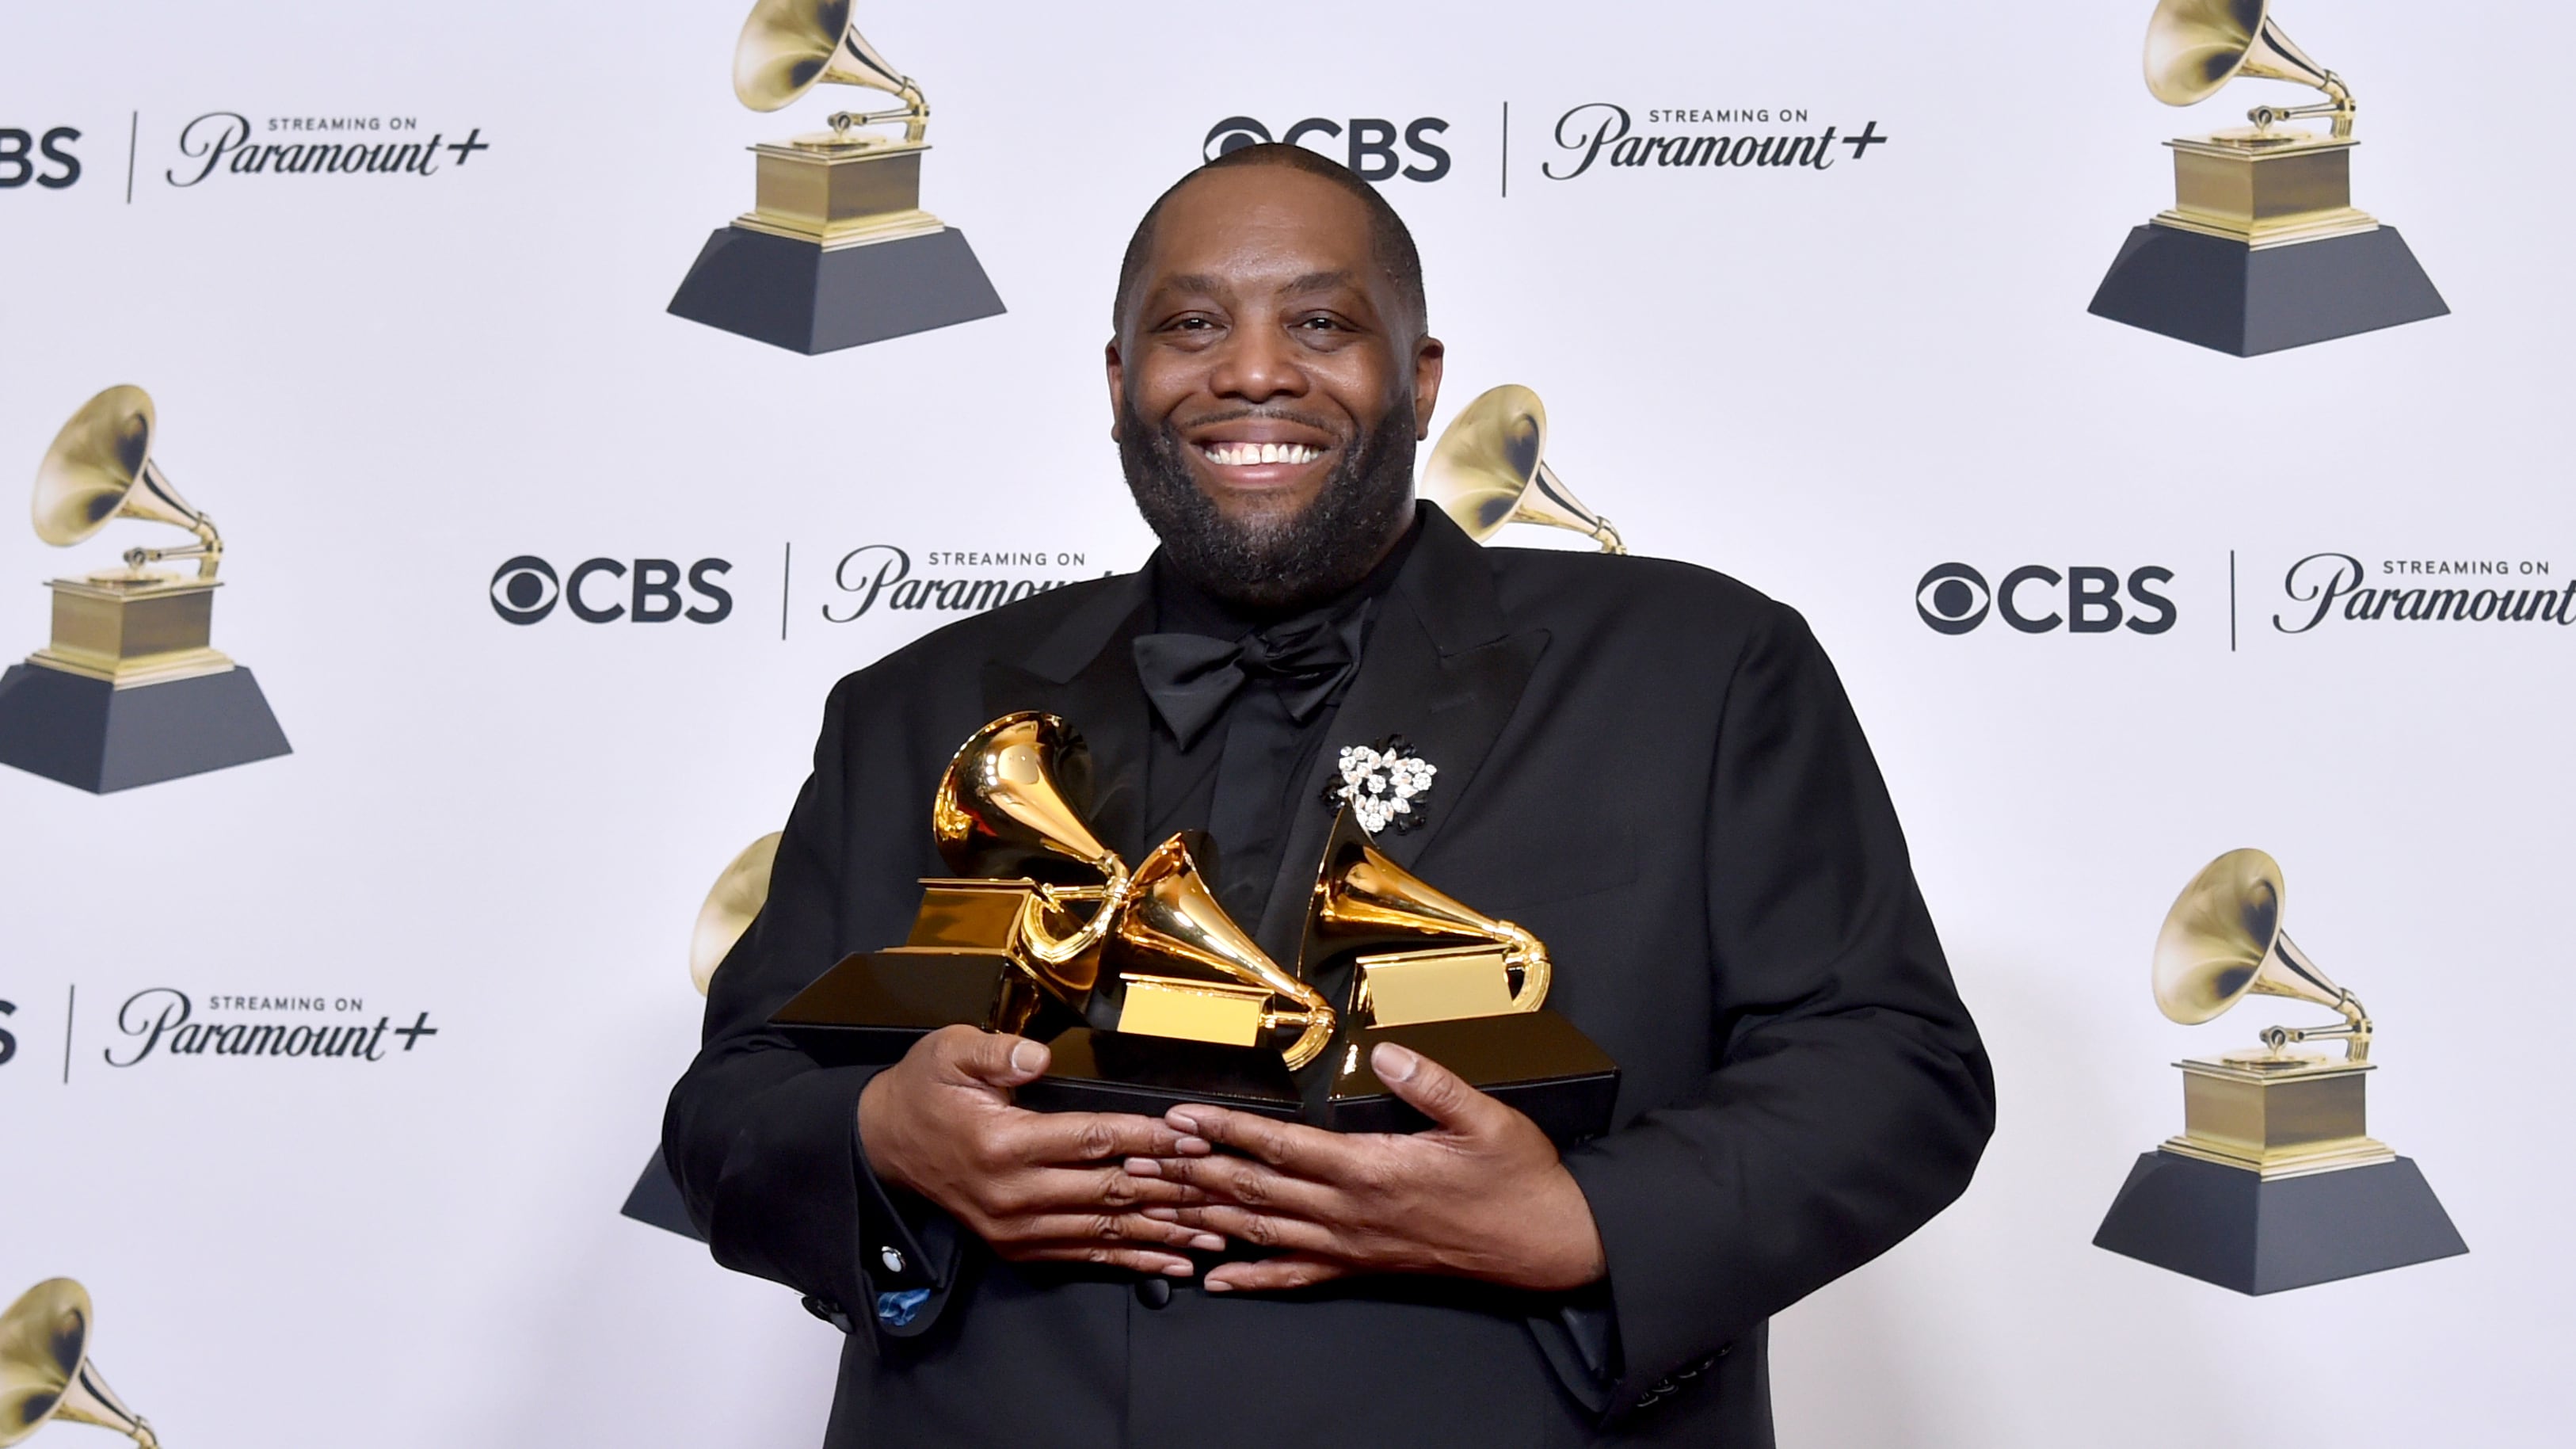 US rapper Killer Mike is expected to avoid charges after his arrest (Richard Shotwell/Invision/AP)